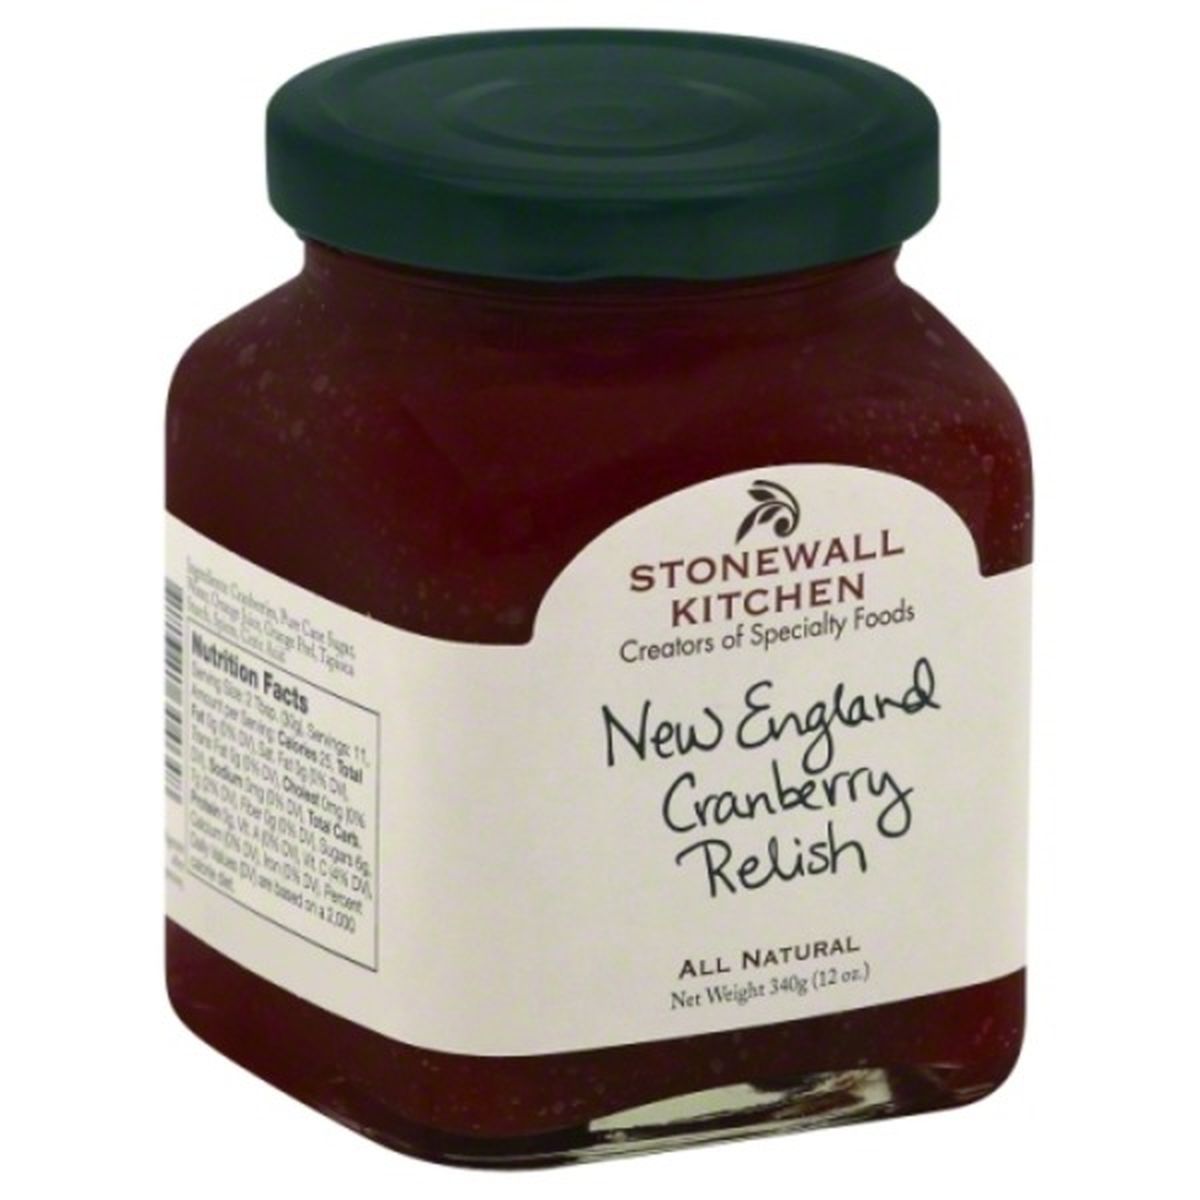 Calories in Stonewall Kitchen Relish, New England Cranberry